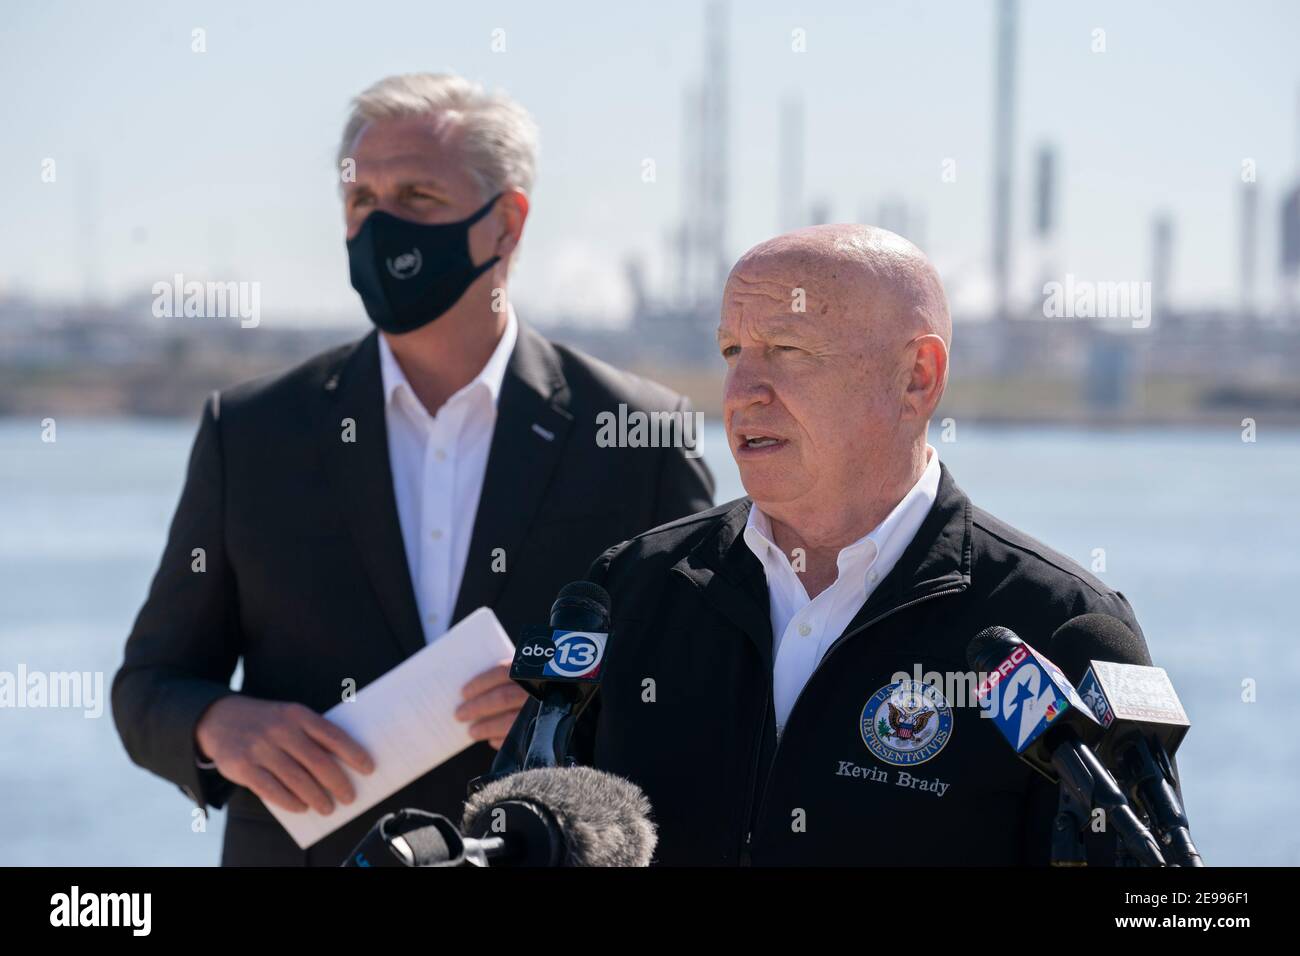 Houston, Texas USA Feb. 2, 2021: Congressional Republicans including U.S. Rep. Kevin Brady (R-TX) criticize President Joe Biden's executive order to cancel the Keystone XL pipeline at a press conference at the Houston Ship Channel. Behind Brady is House Minority Leader Kevin McCarthy (R-CA). ©Bob Daemmrich Stock Photo